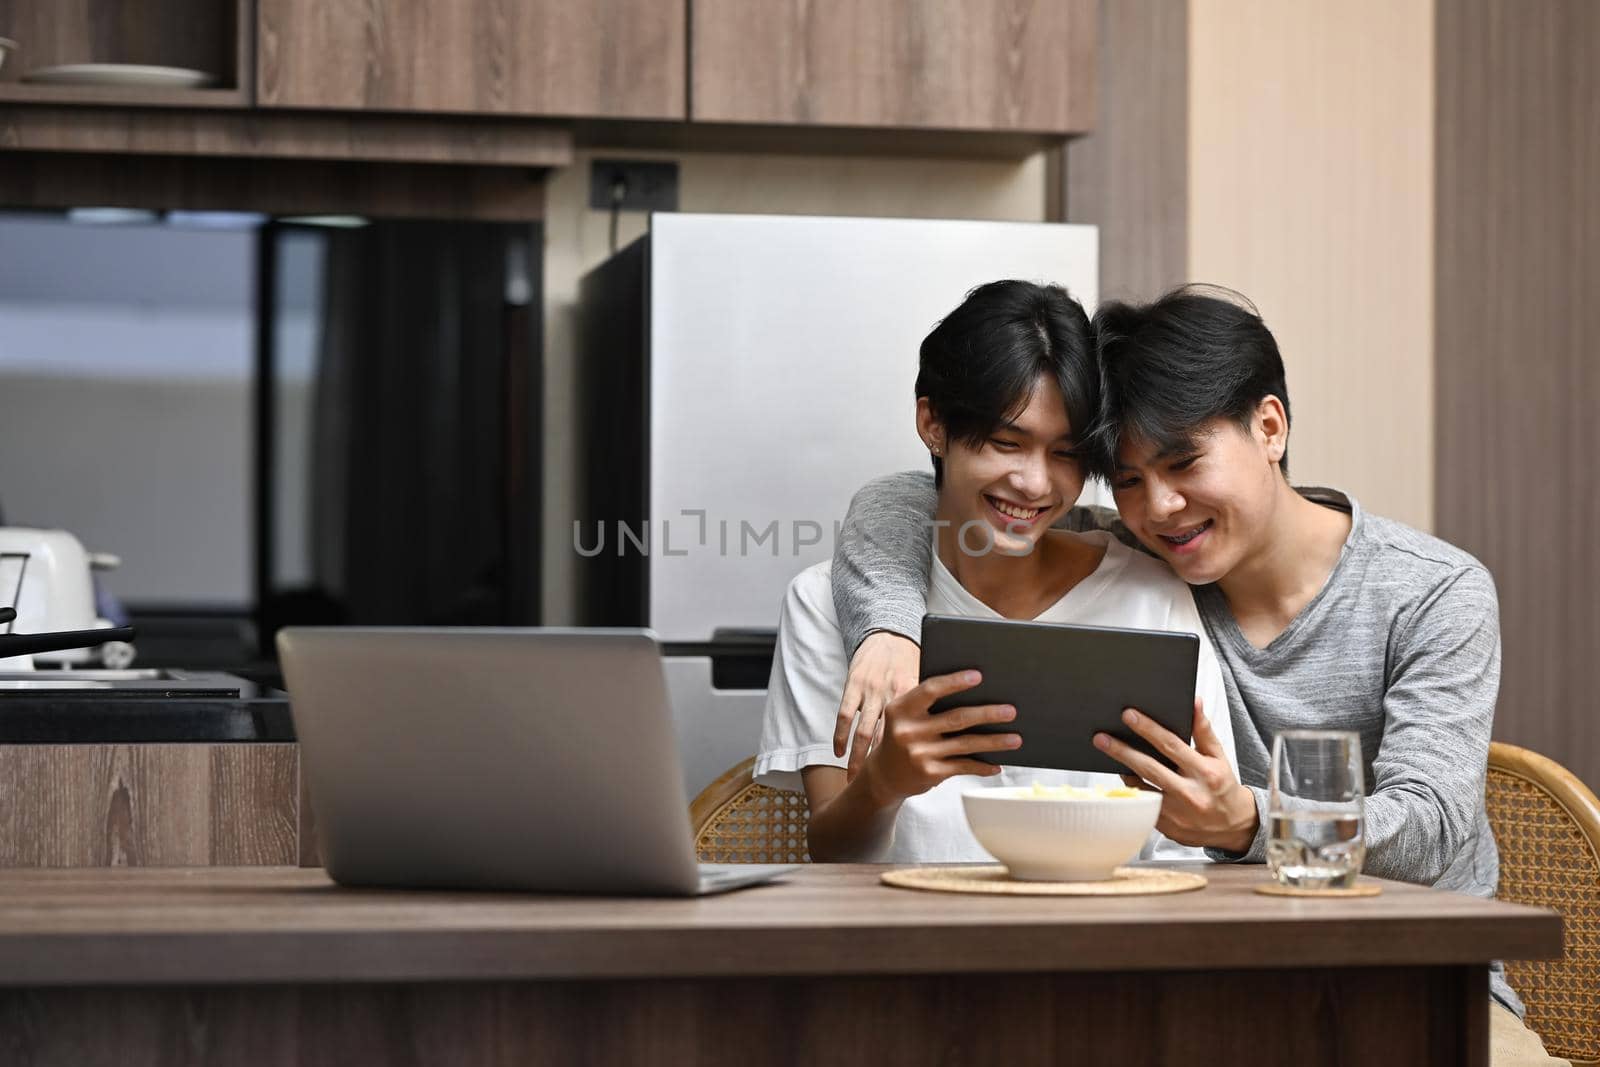 Happy gay couple embracing and surfing internet with digital tablet together at kitchen table. LGBT, pride, relationships and equality concept by prathanchorruangsak